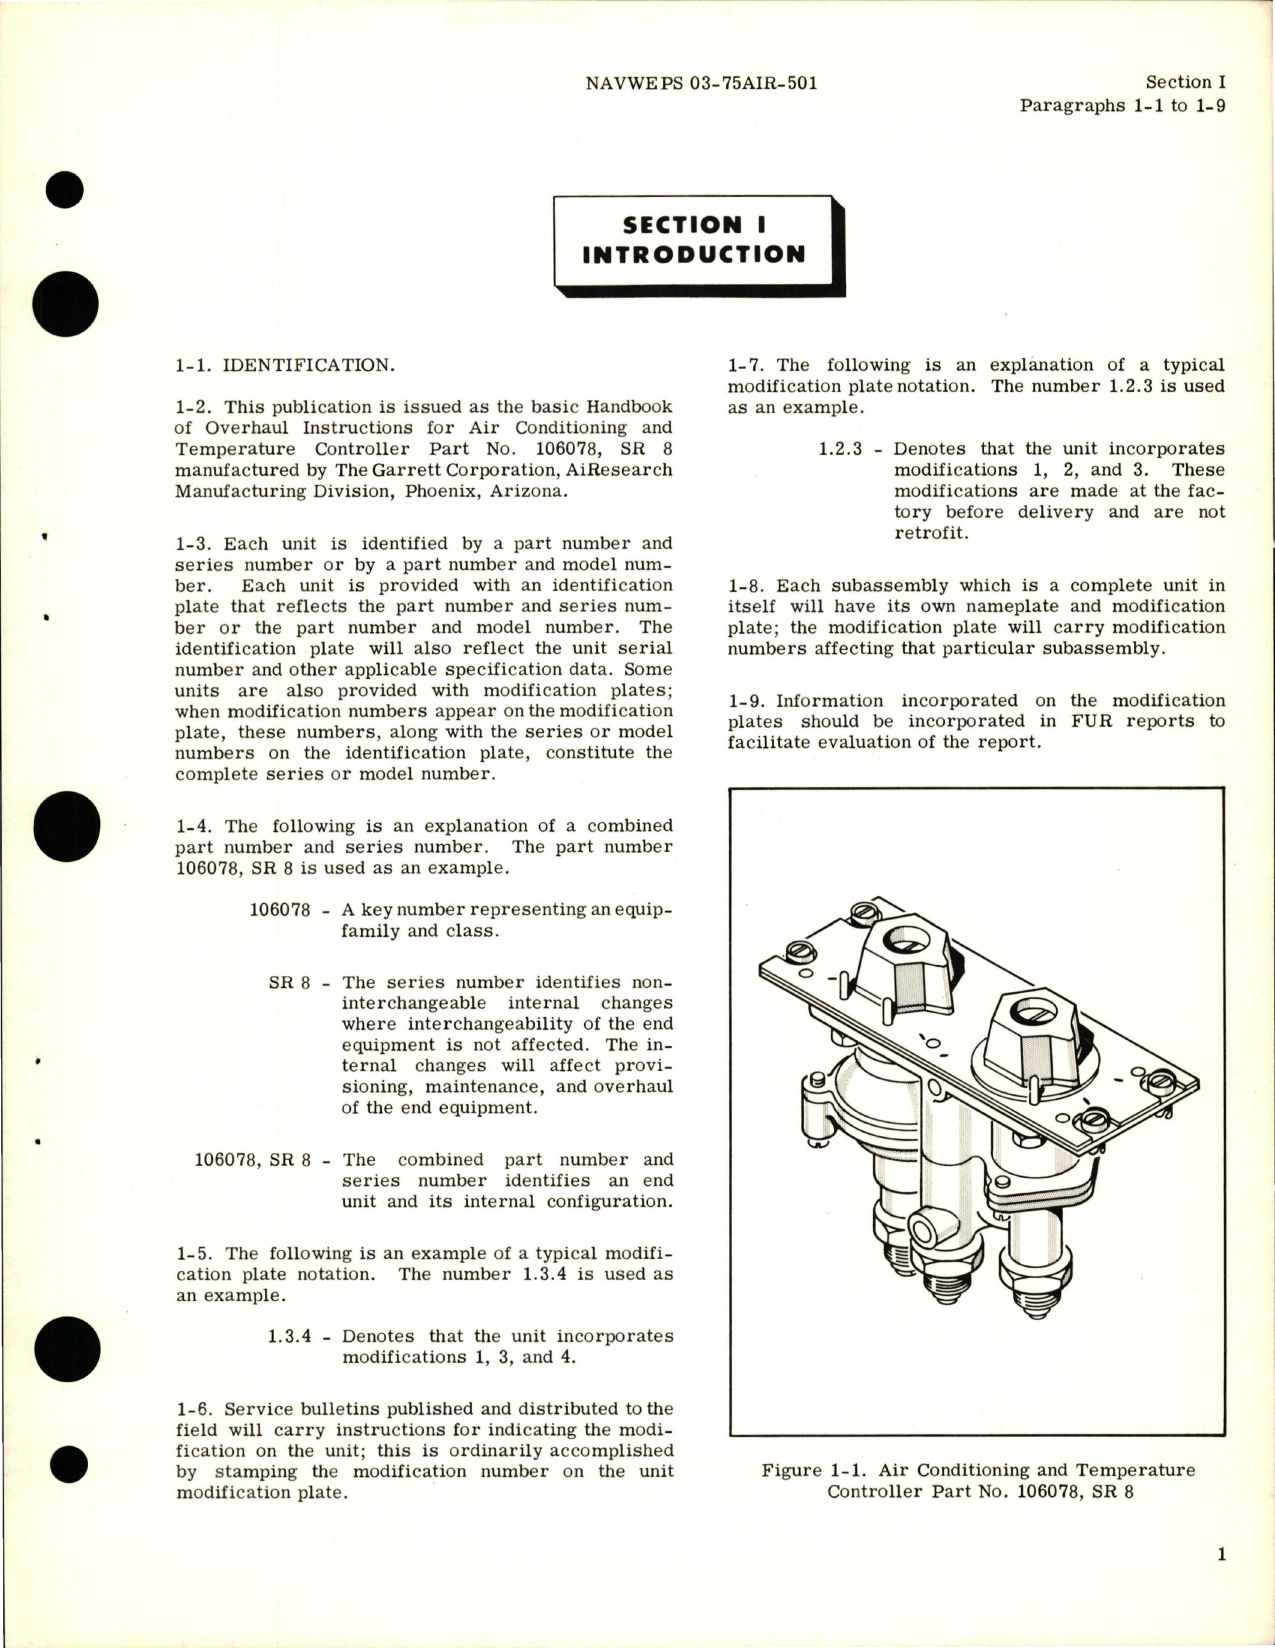 Sample page 5 from AirCorps Library document: Overhaul Instructions for Air Conditioning and Temperature Controller - Part 106078 and SR 8